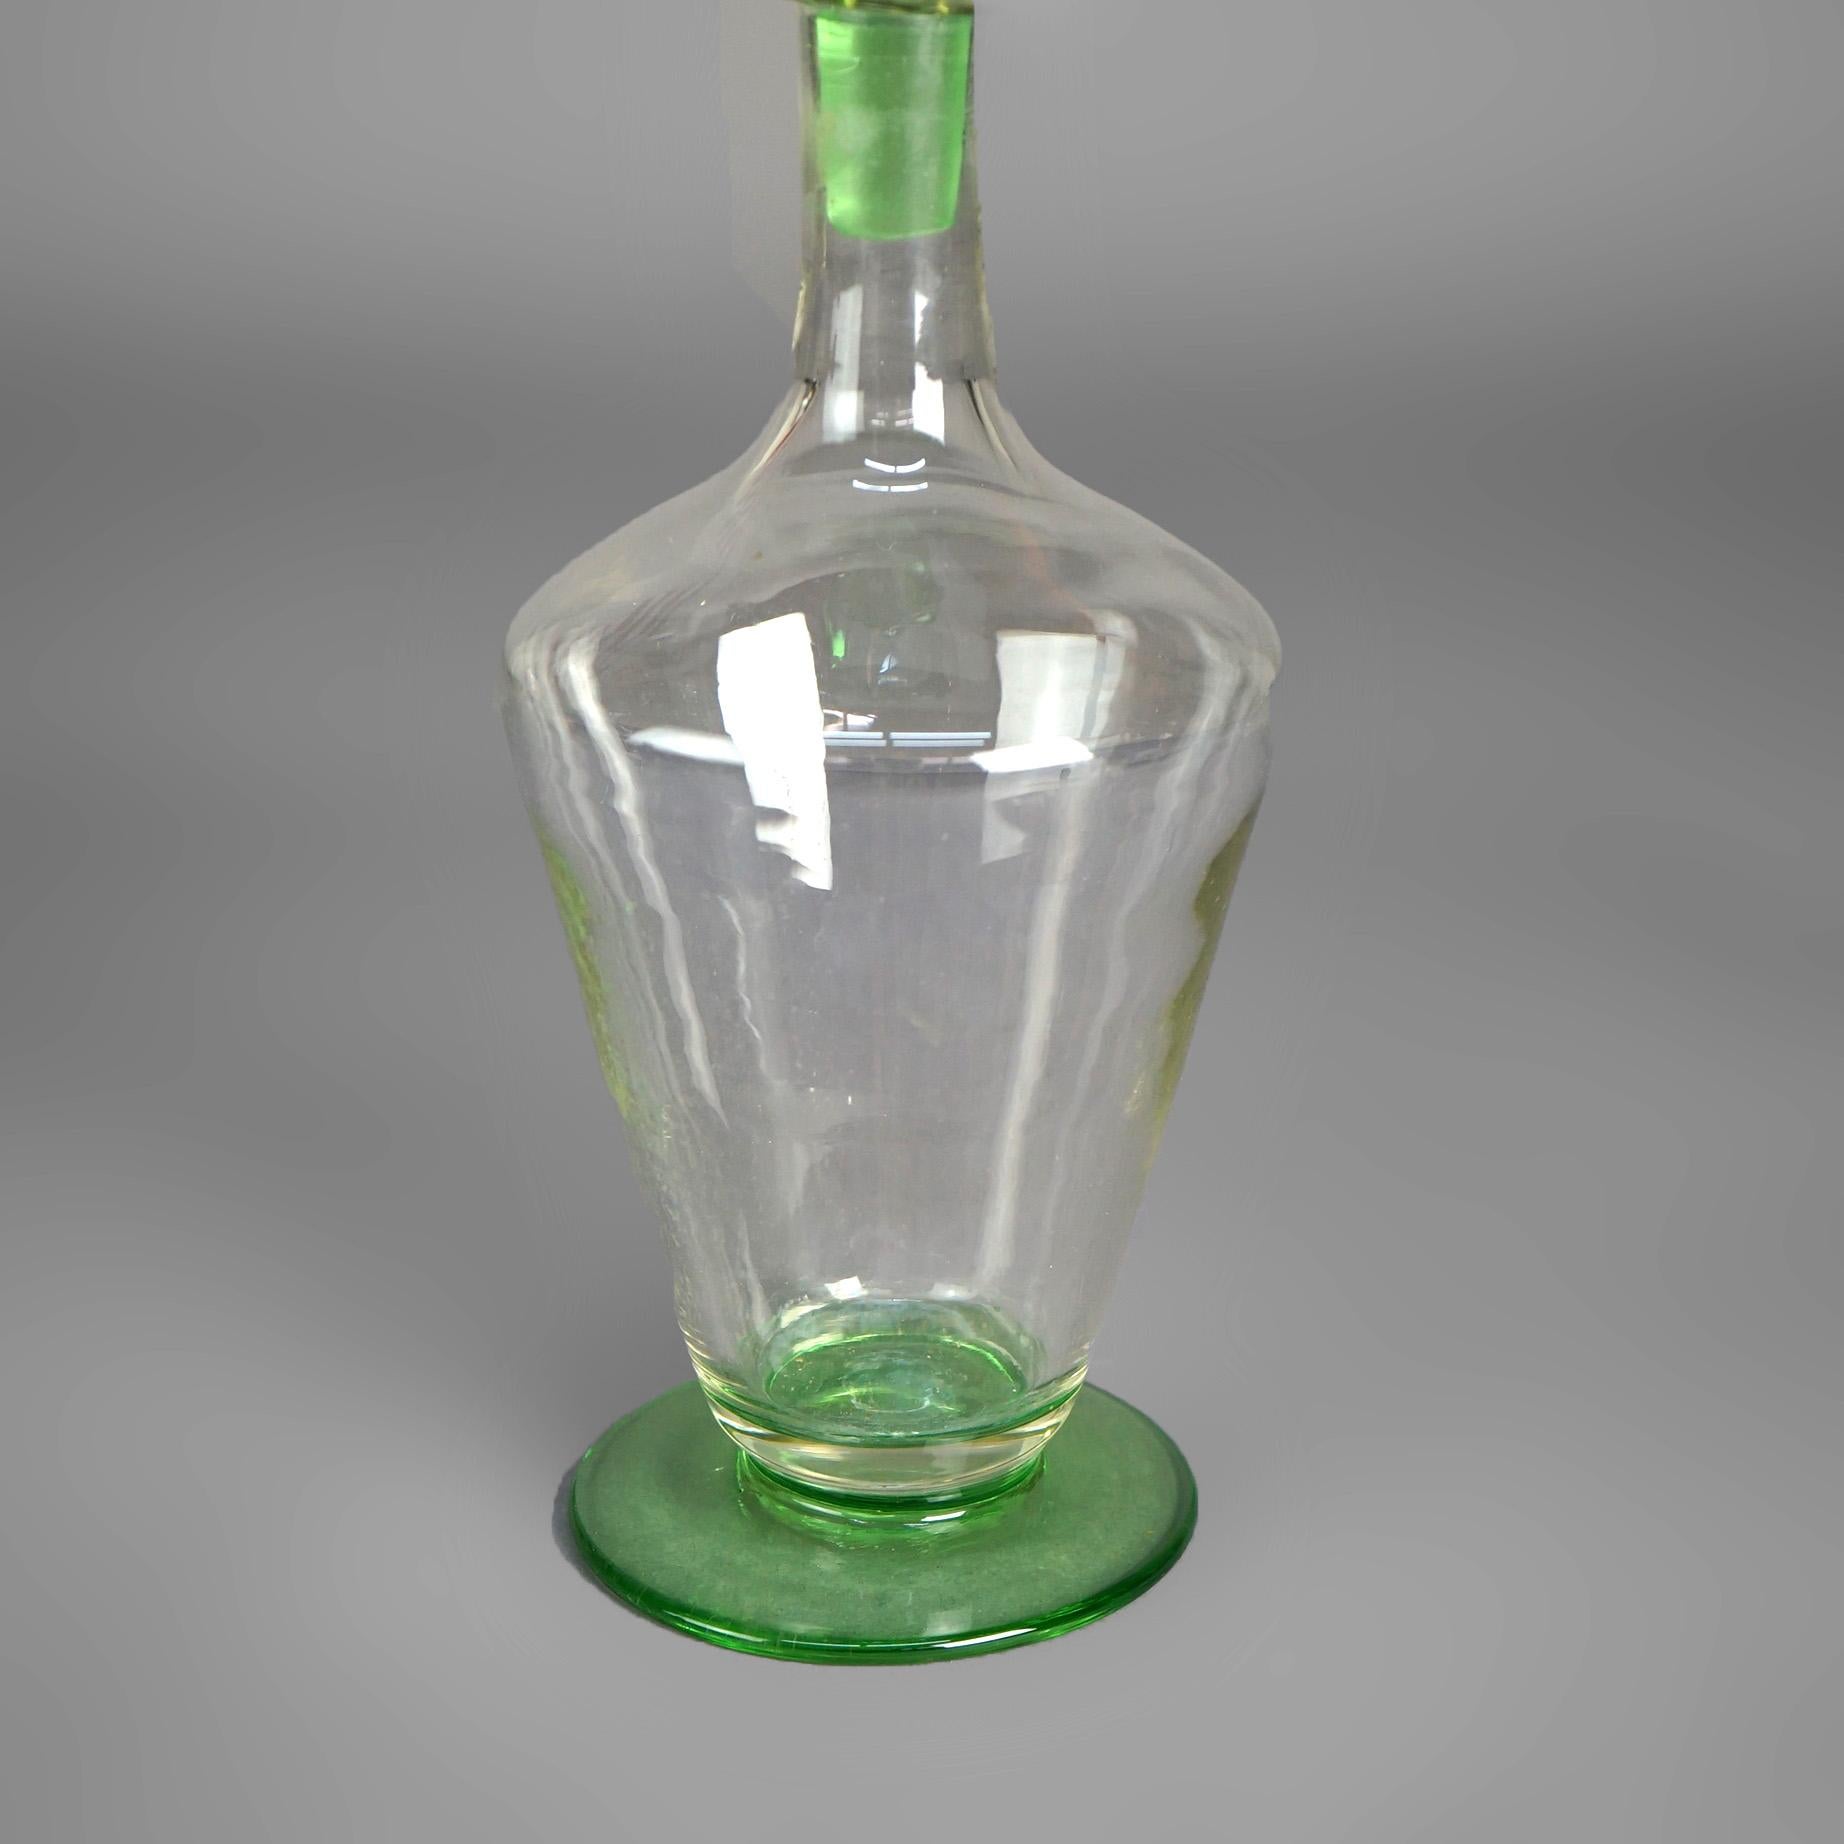 Arts and Crafts Arts & Crafts  Steuben School Celeste Green & Clear Art Glass Decanter C1920 For Sale